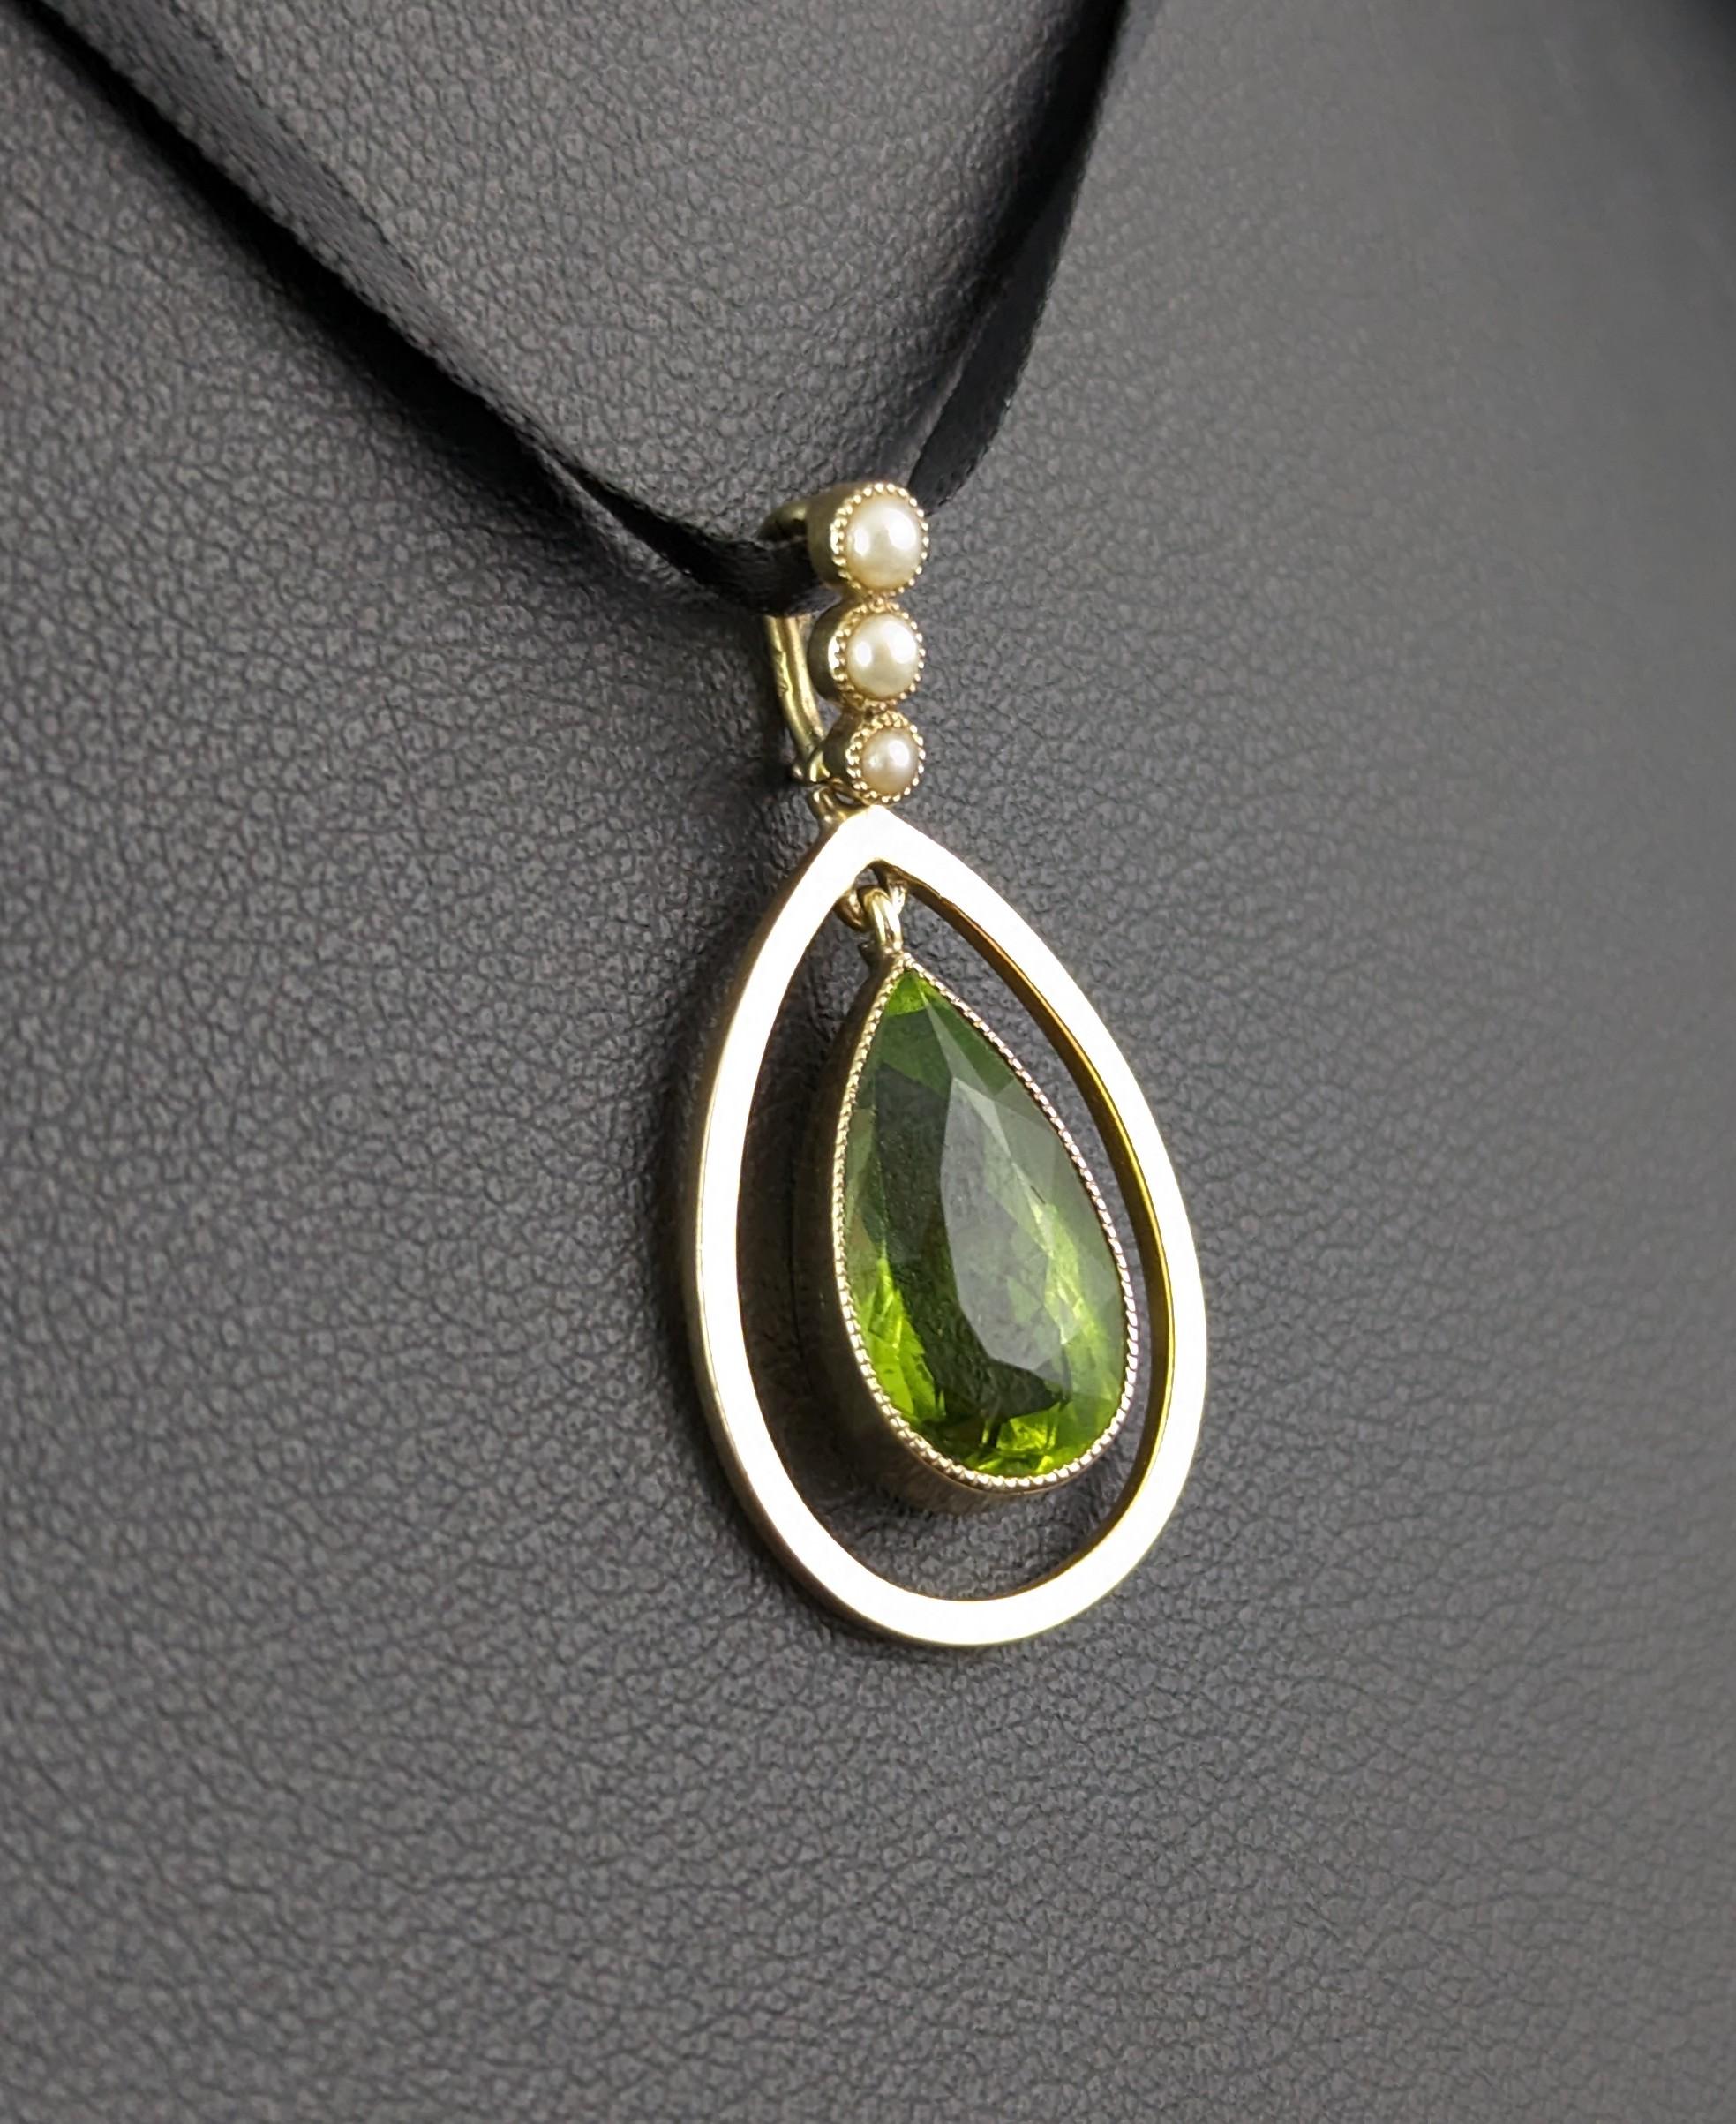 Women's Antique Peridot and seed pearl pendant, 9k gold, Art Nouveau 